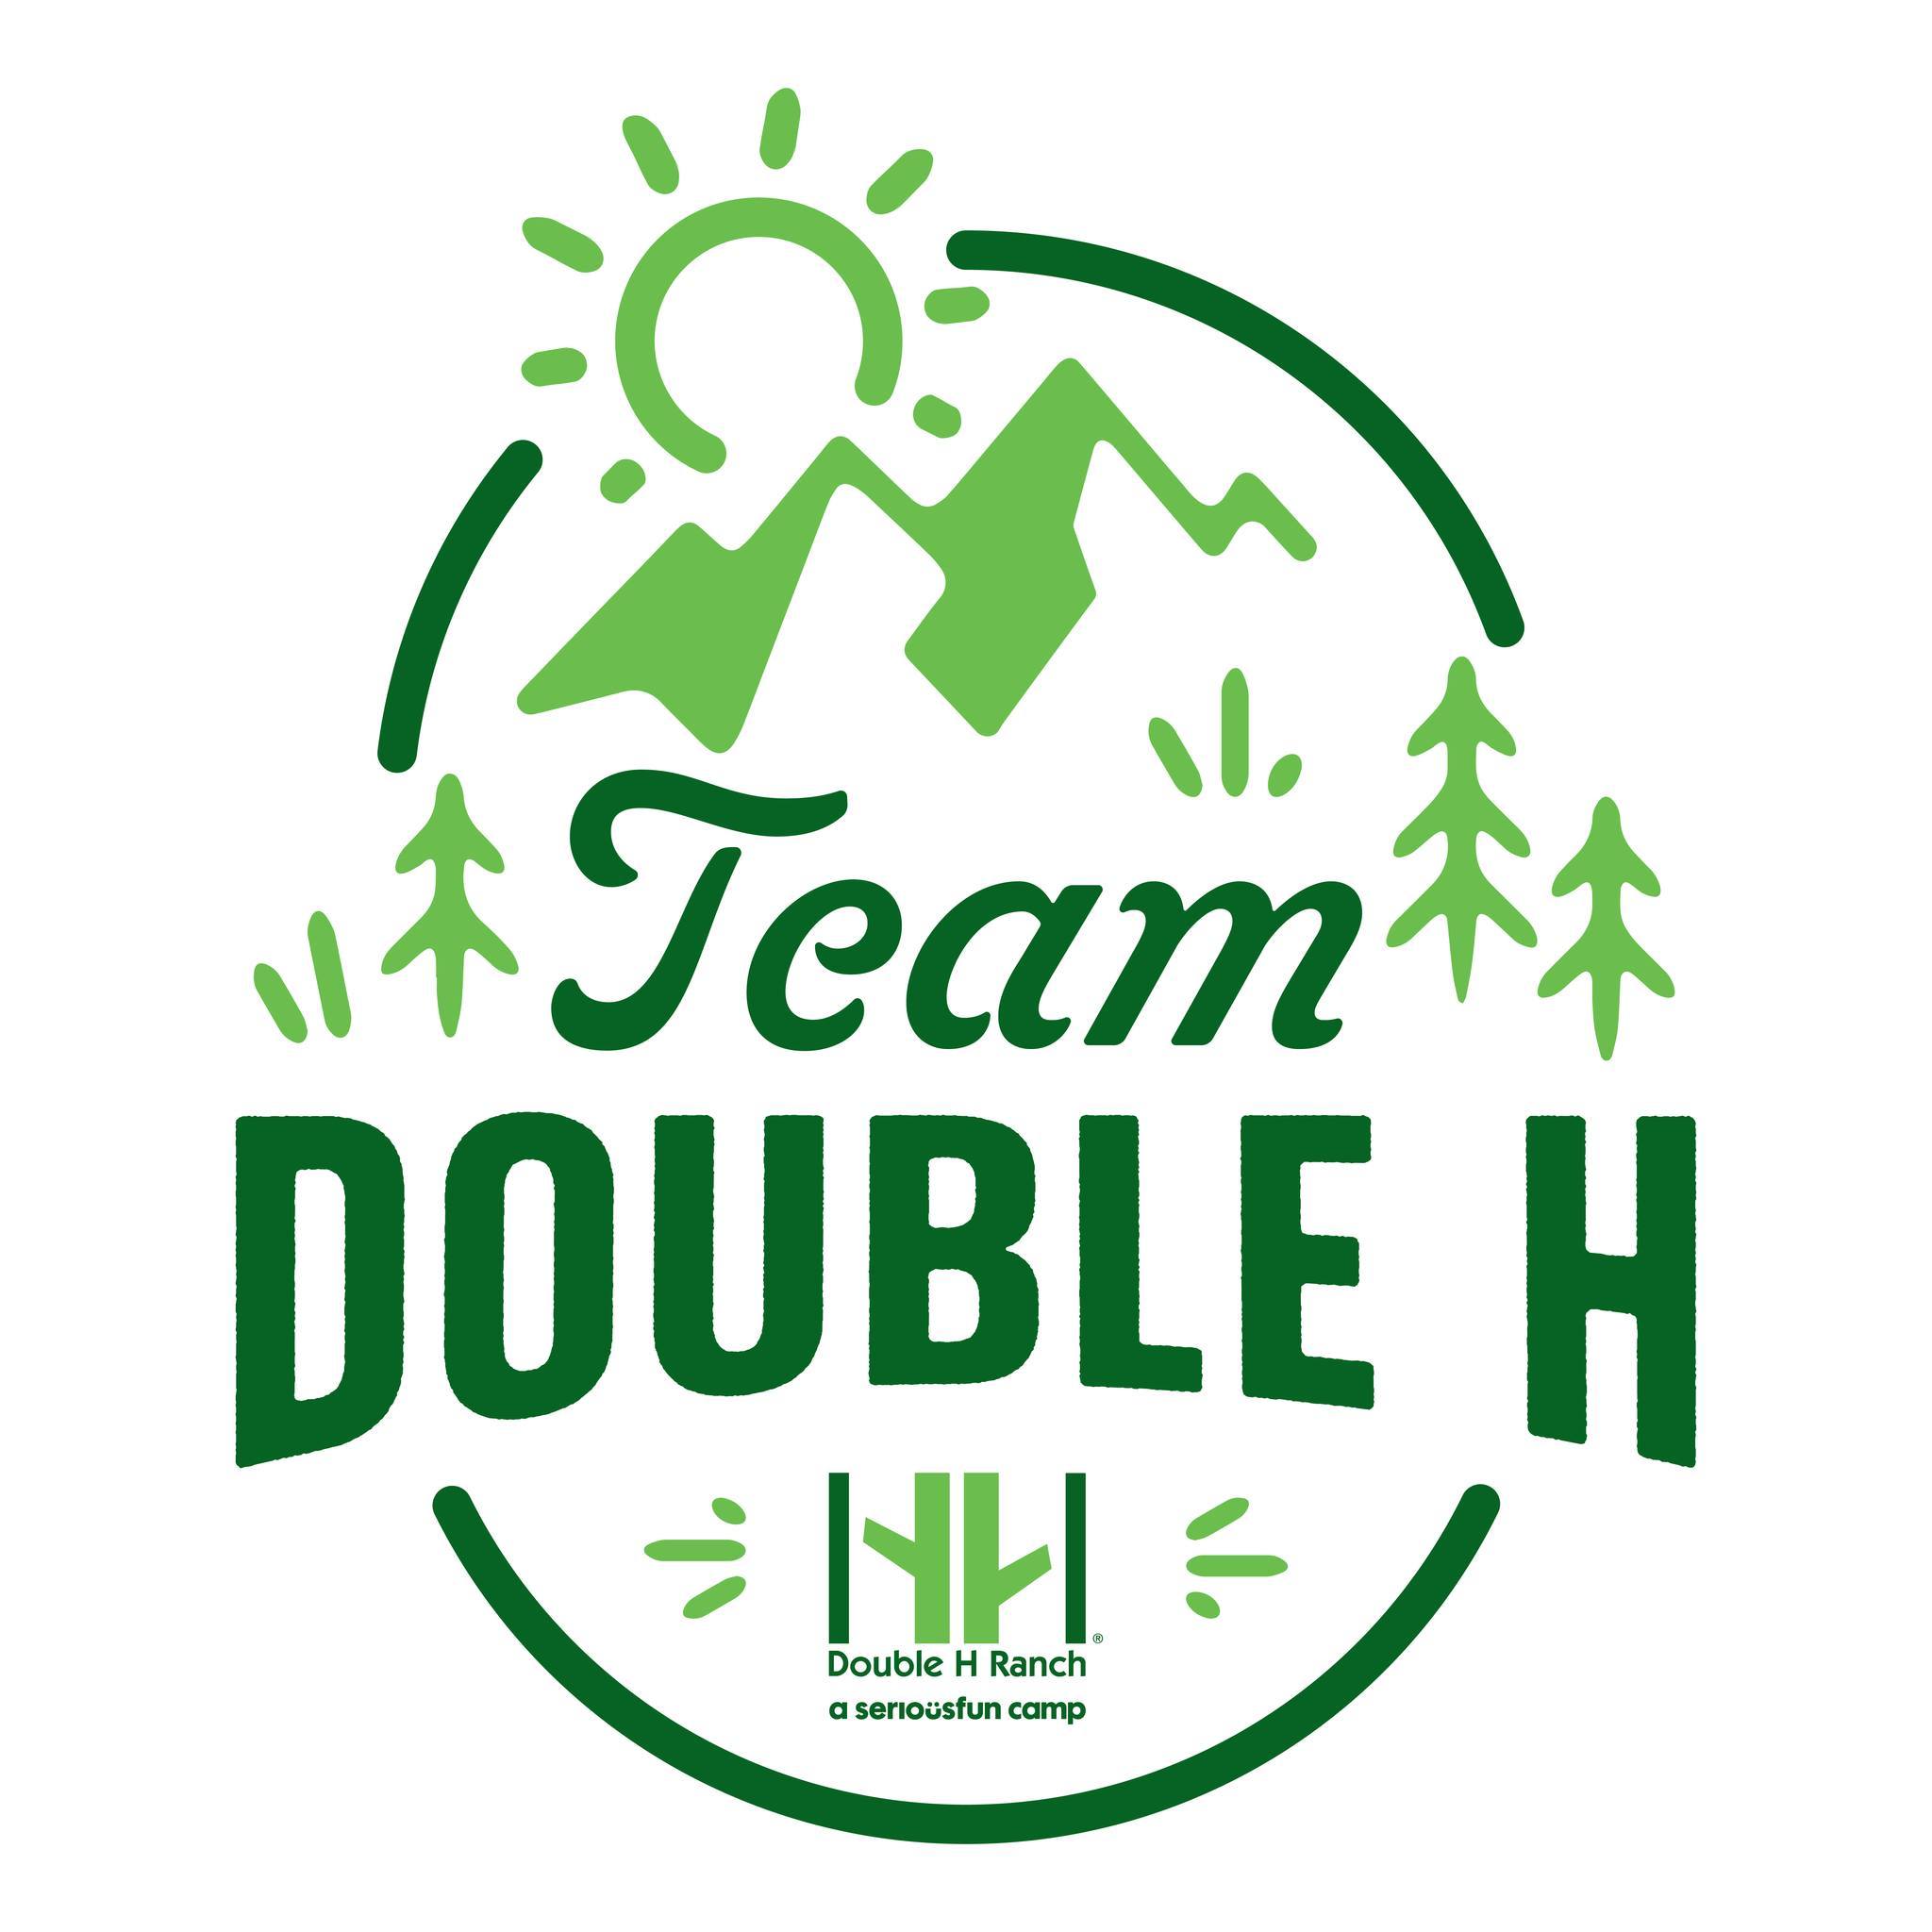 Double H Ranch Named an Official Charity Partner of the 2023 TCS New York City Marathon